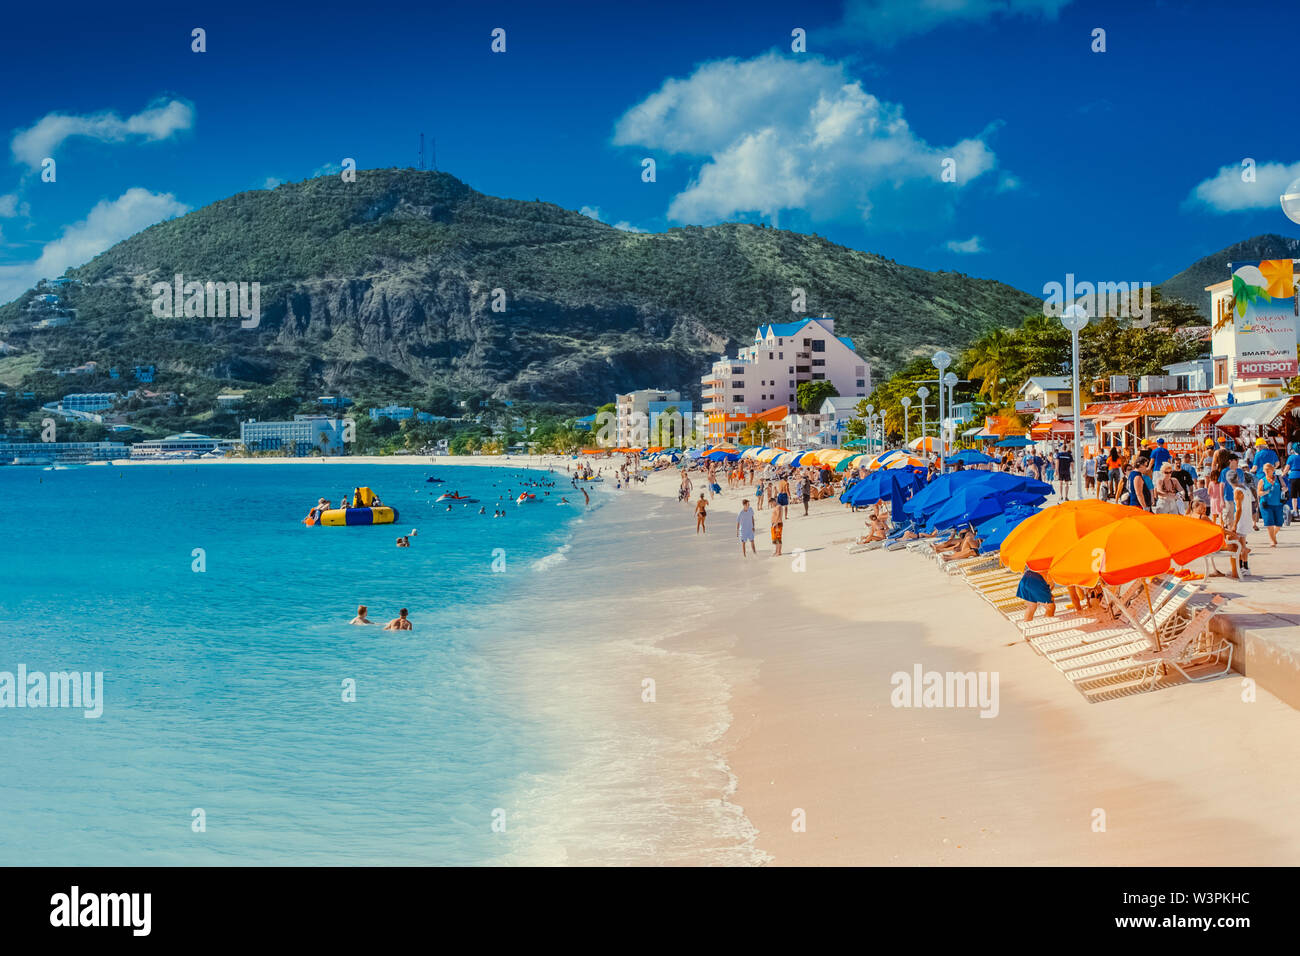 Sint Maarten / Caribbean / Netherlands - January 23.2008: Summer view on the sandy beach with people resting and swimming in the turquoise color sea. Stock Photo